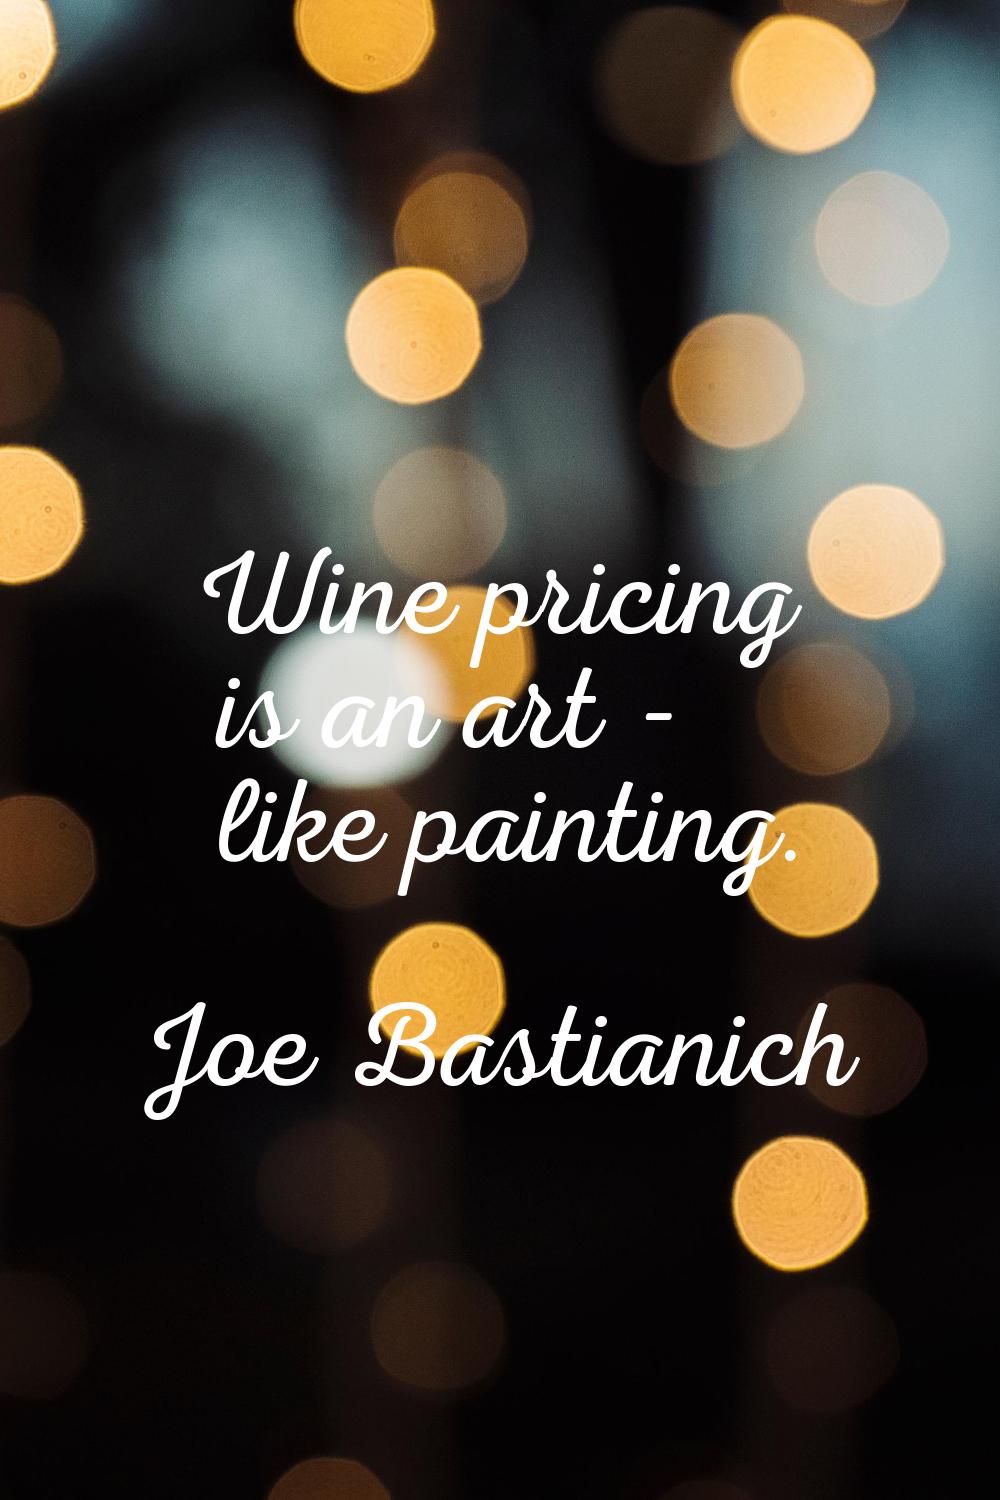 Wine pricing is an art - like painting.